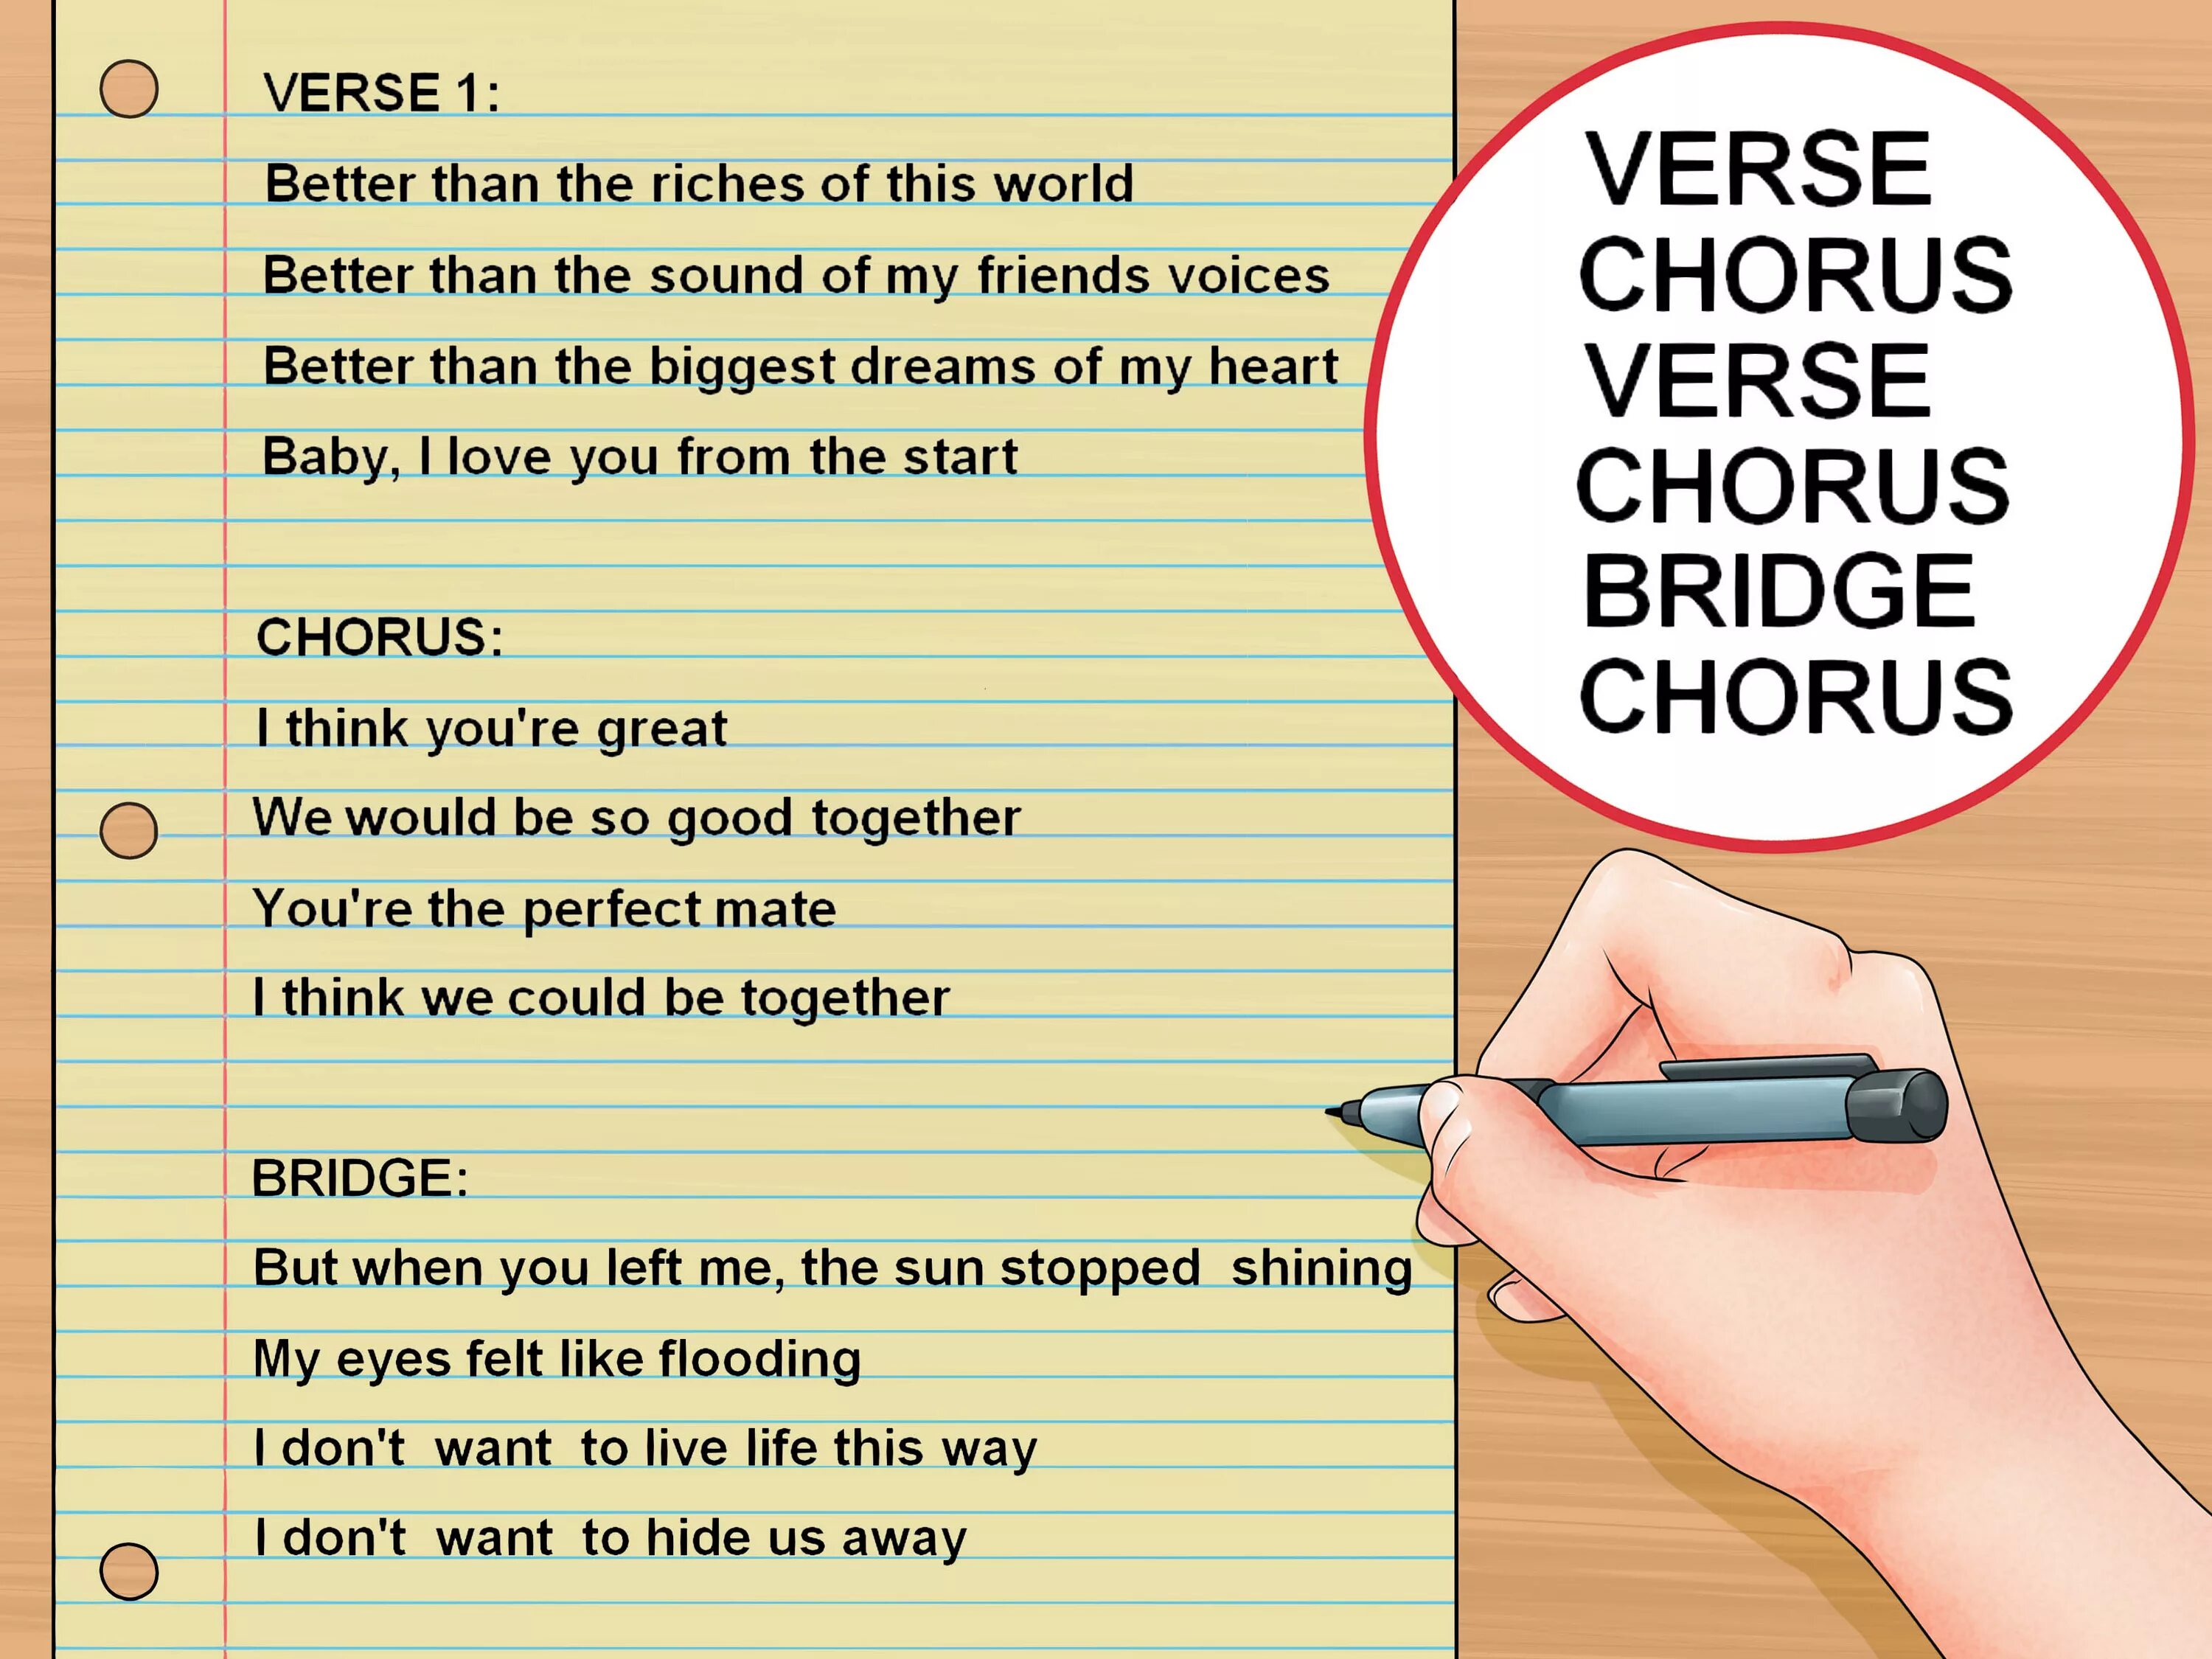 How to write a Song. How to write good. Writing Verses. How to write a pre Chorus. How to start writing